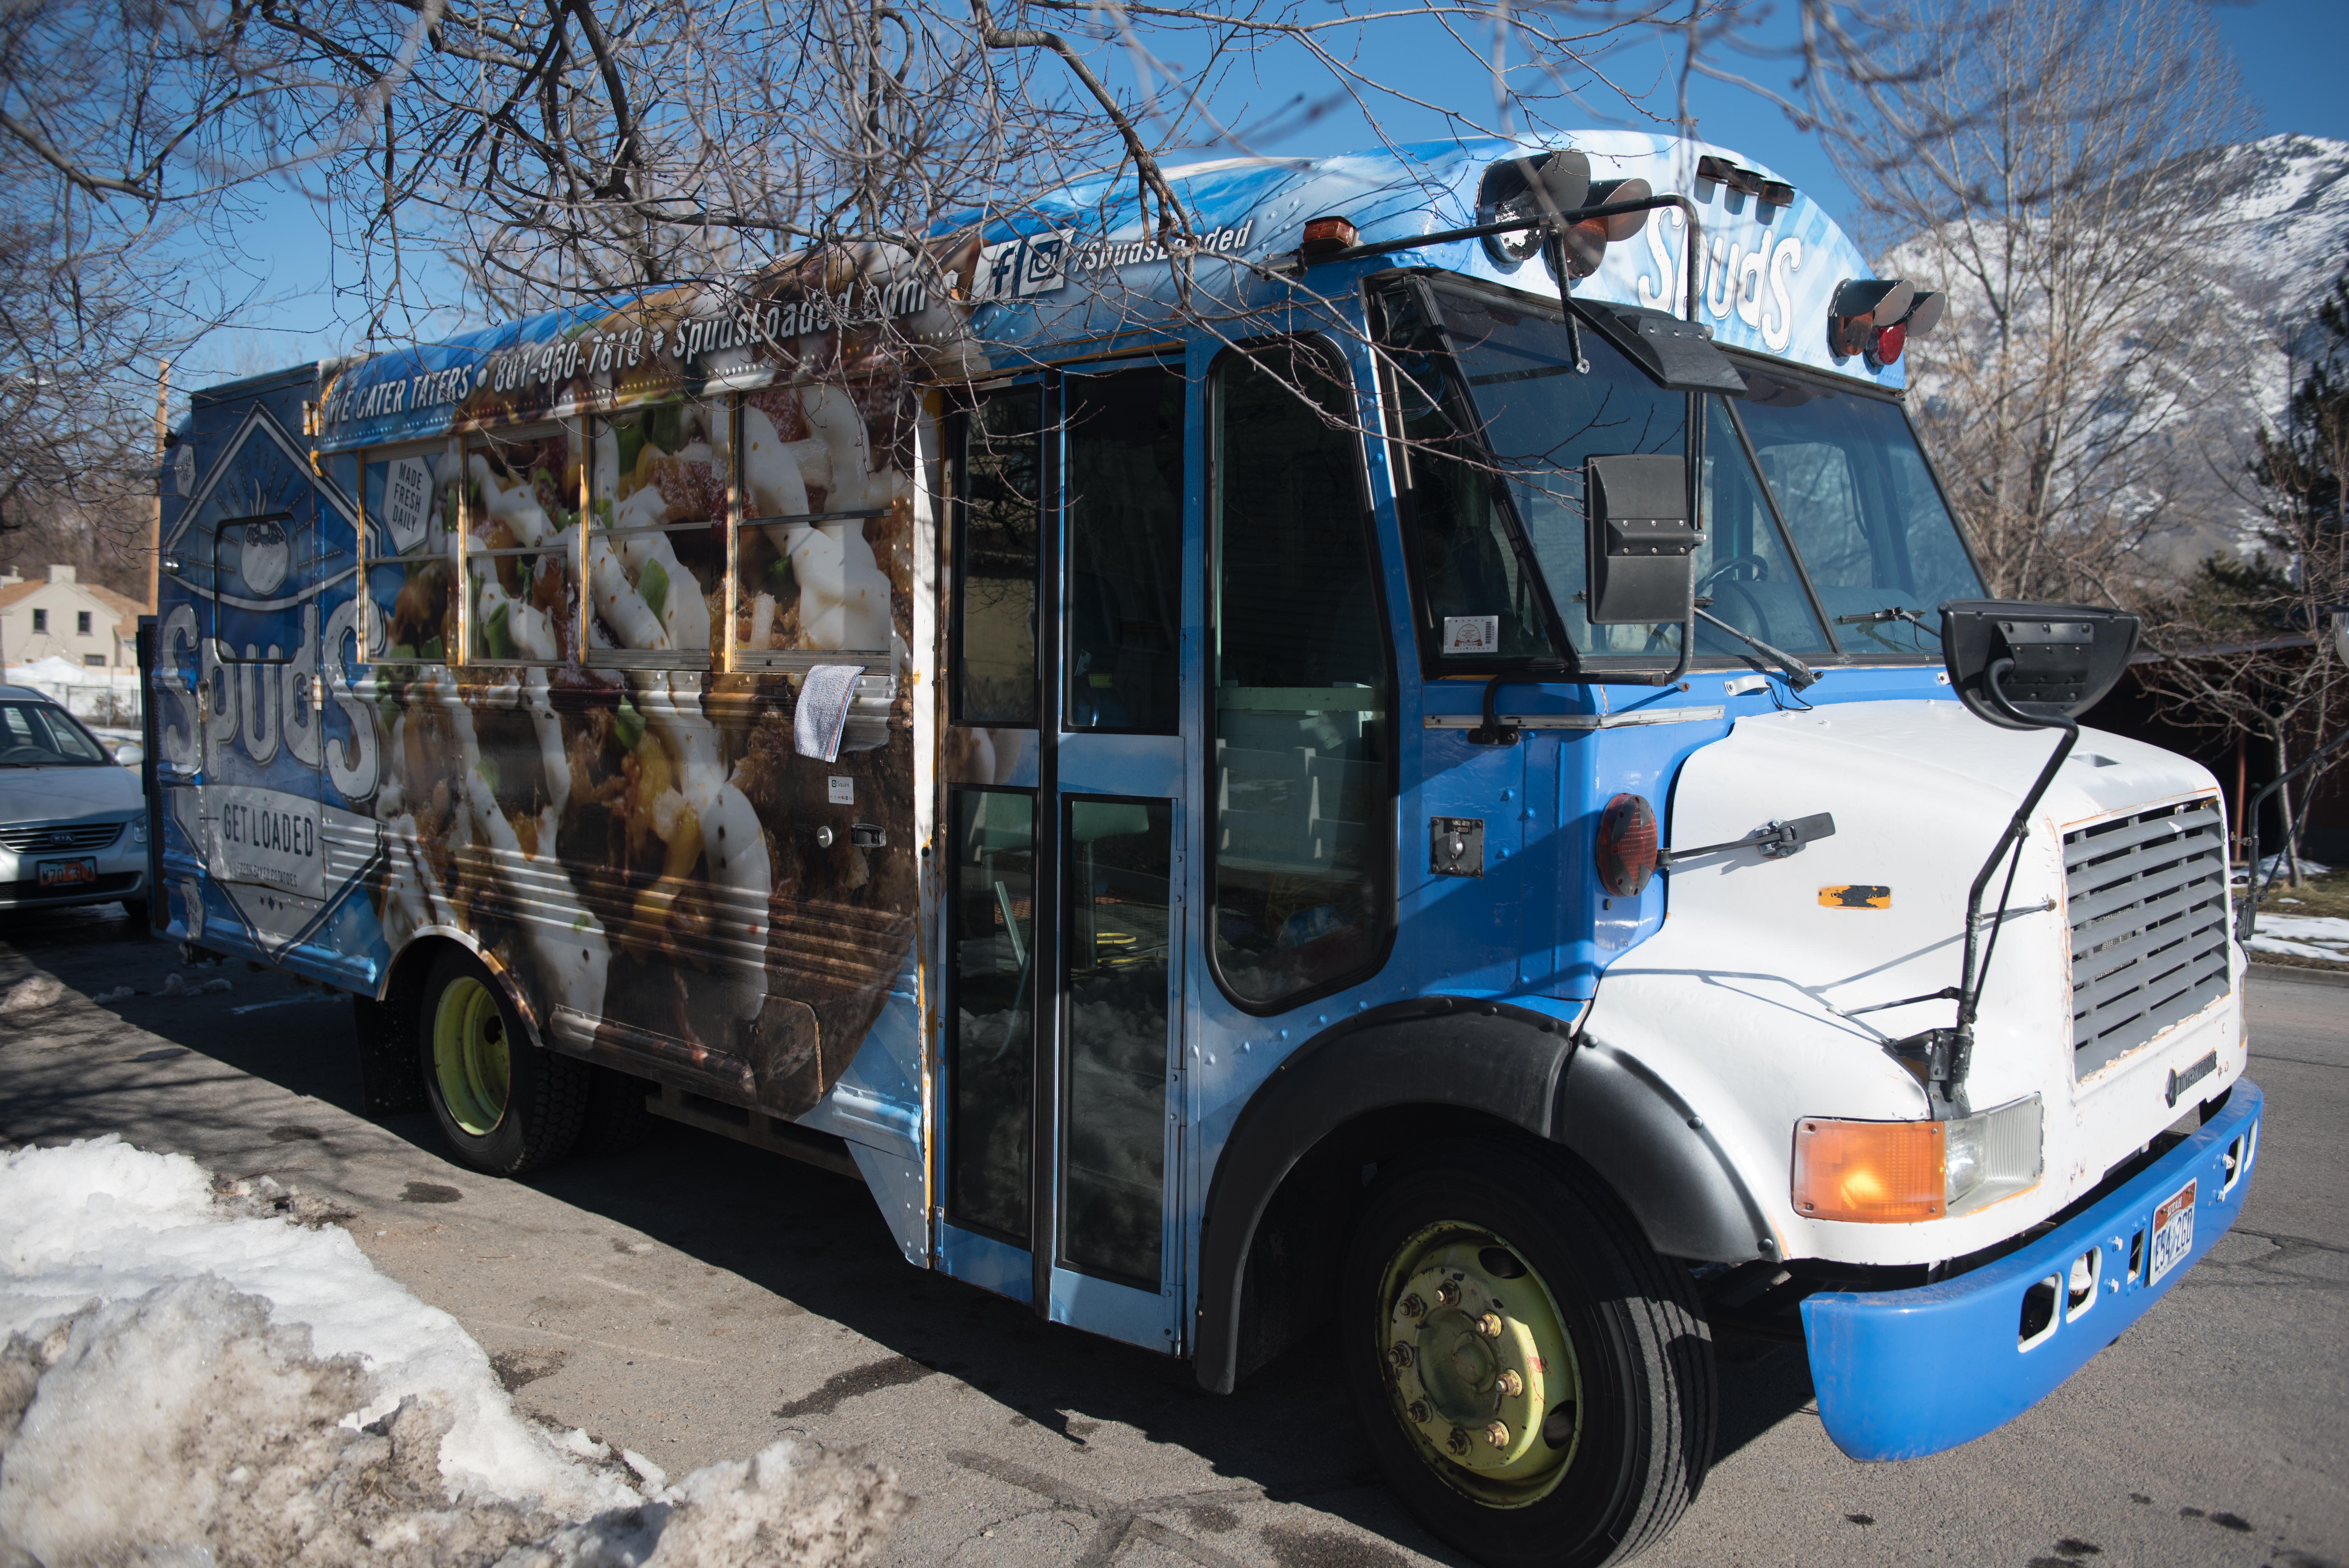 Spuds owner Gary Kinross sold potatoes out of a school-bus-turned-foodtruck before opening his own restaurant.